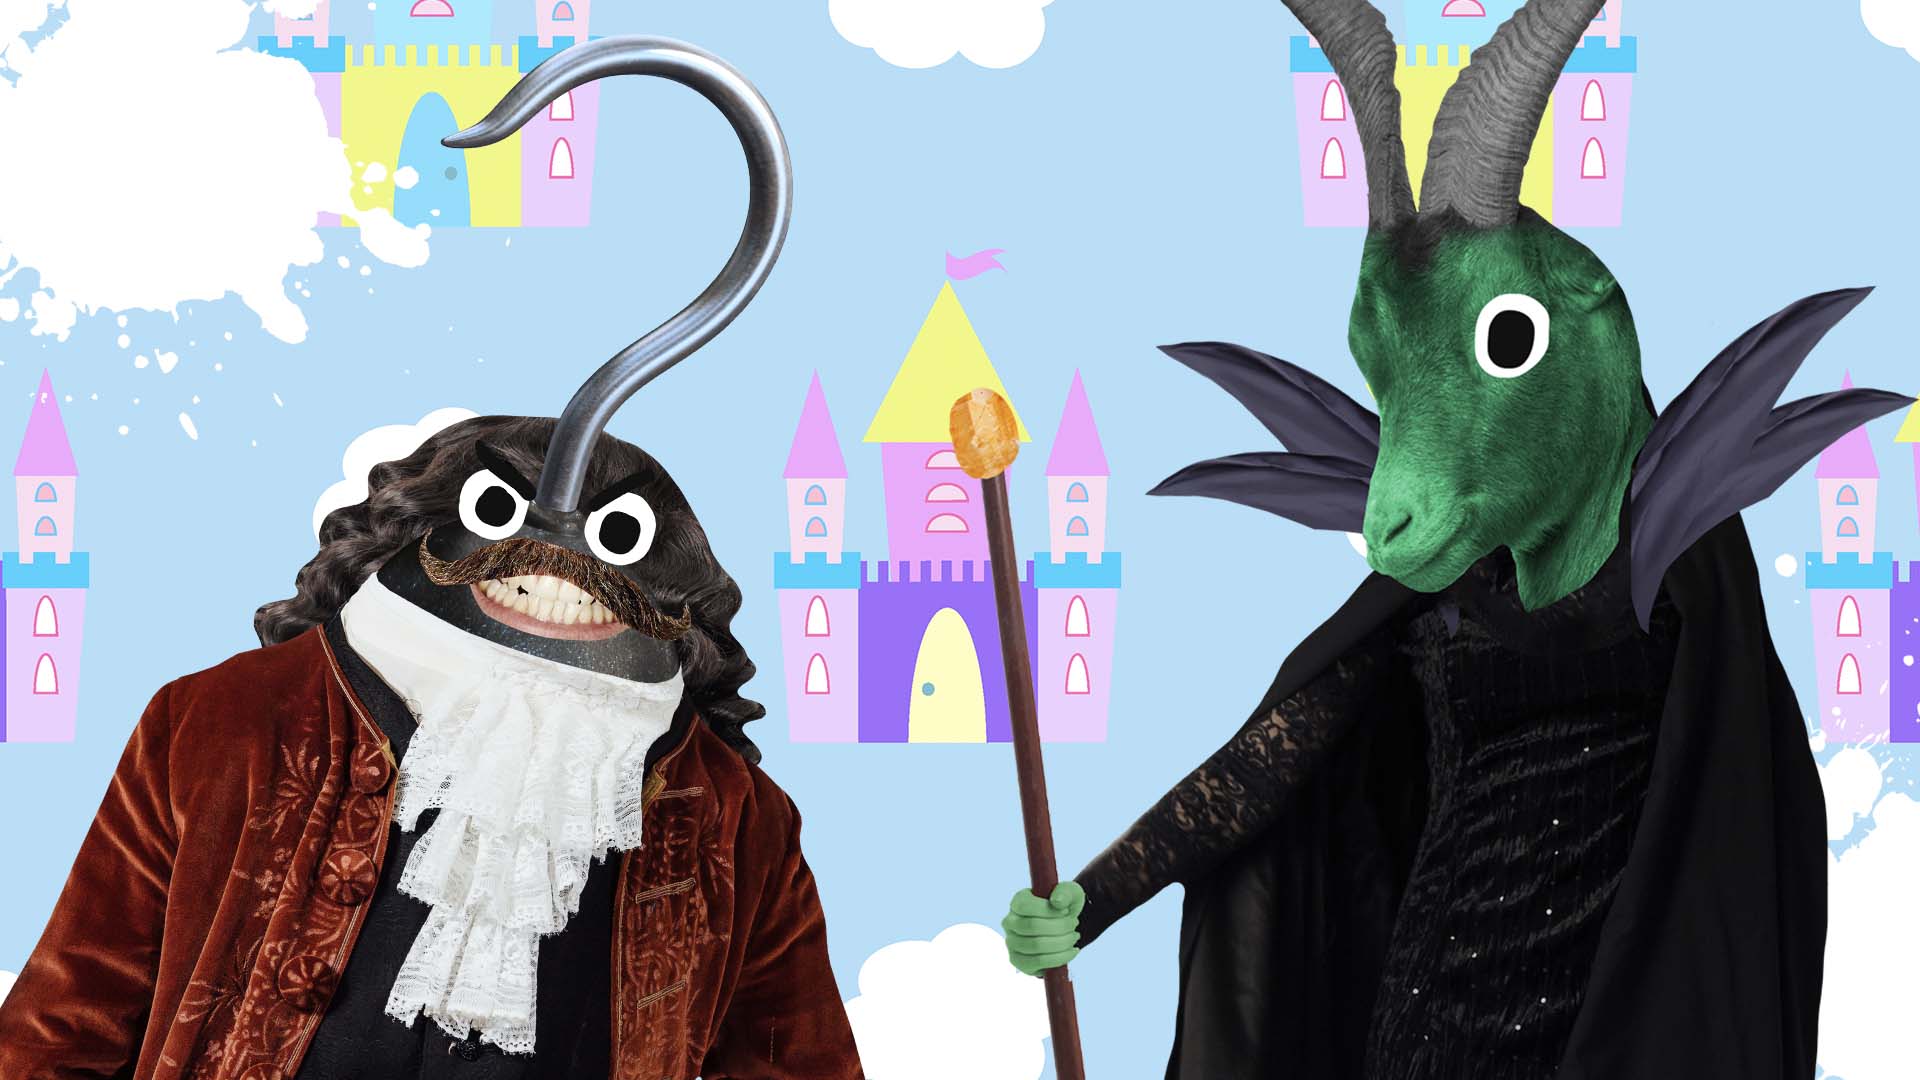 Captain Hook and Maleficent